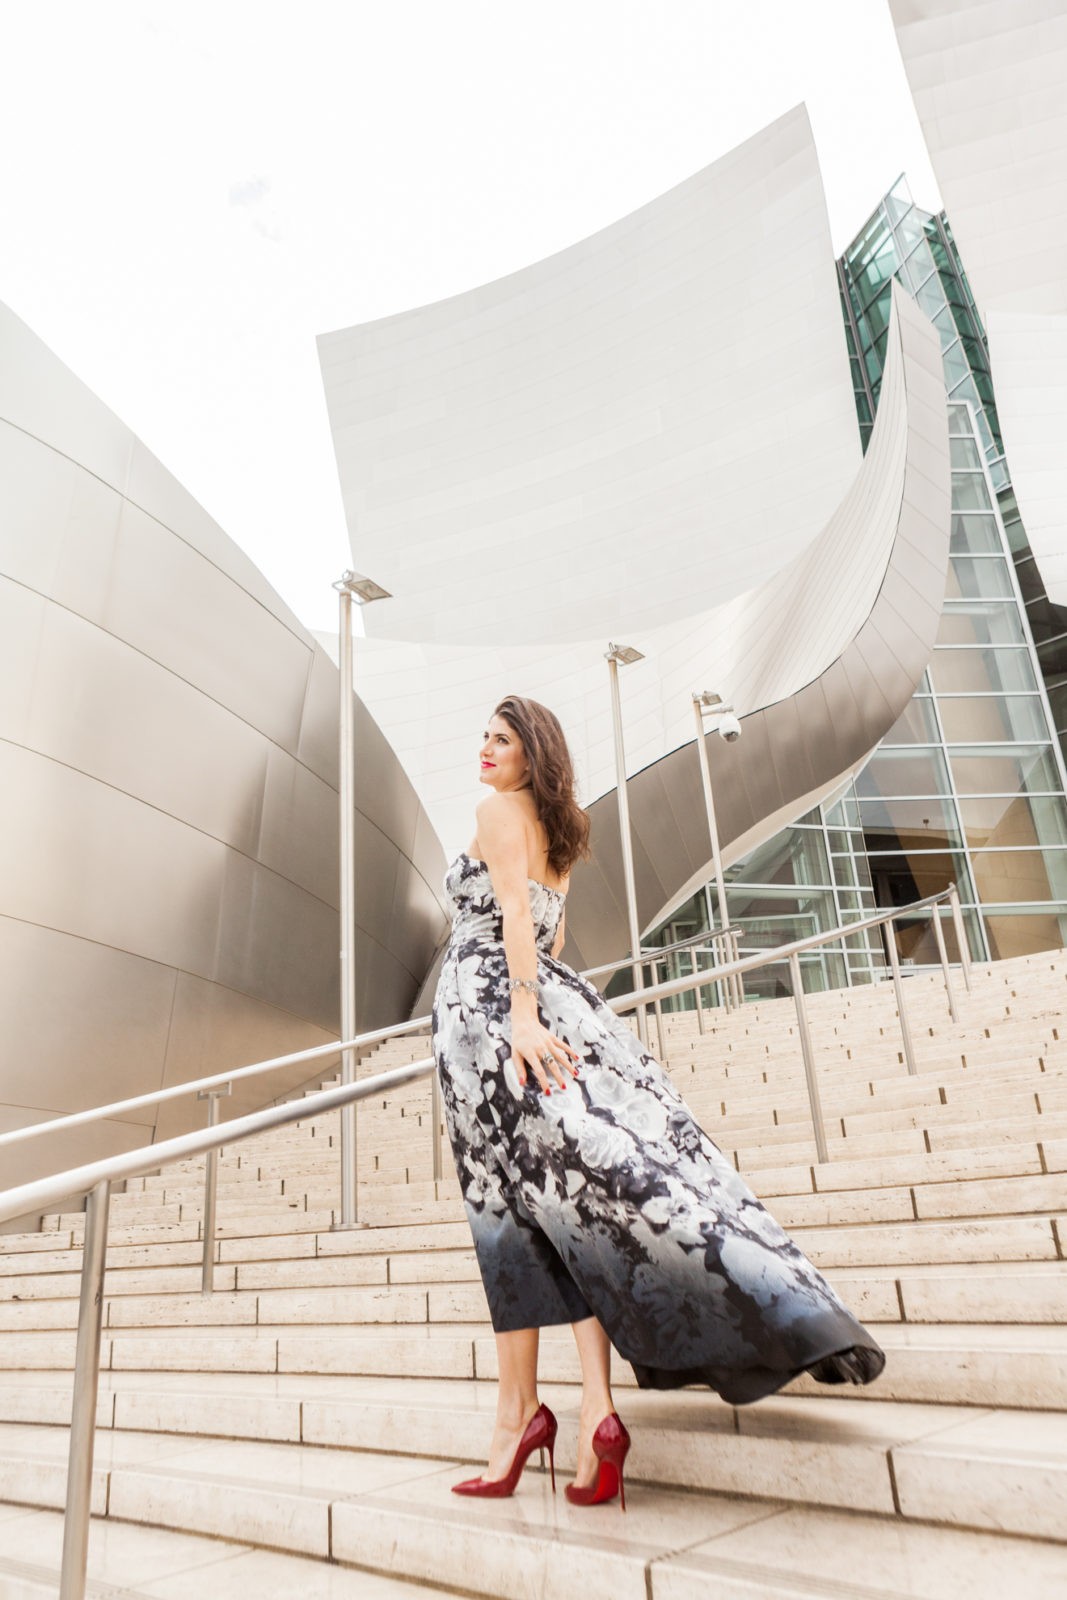 Alfred Sung Floral Dress by Los Angeles Fashion Blogger Laura Lily, 12 Days of Holiday Style Dresses, Disney Concert Hall Photoshoot,